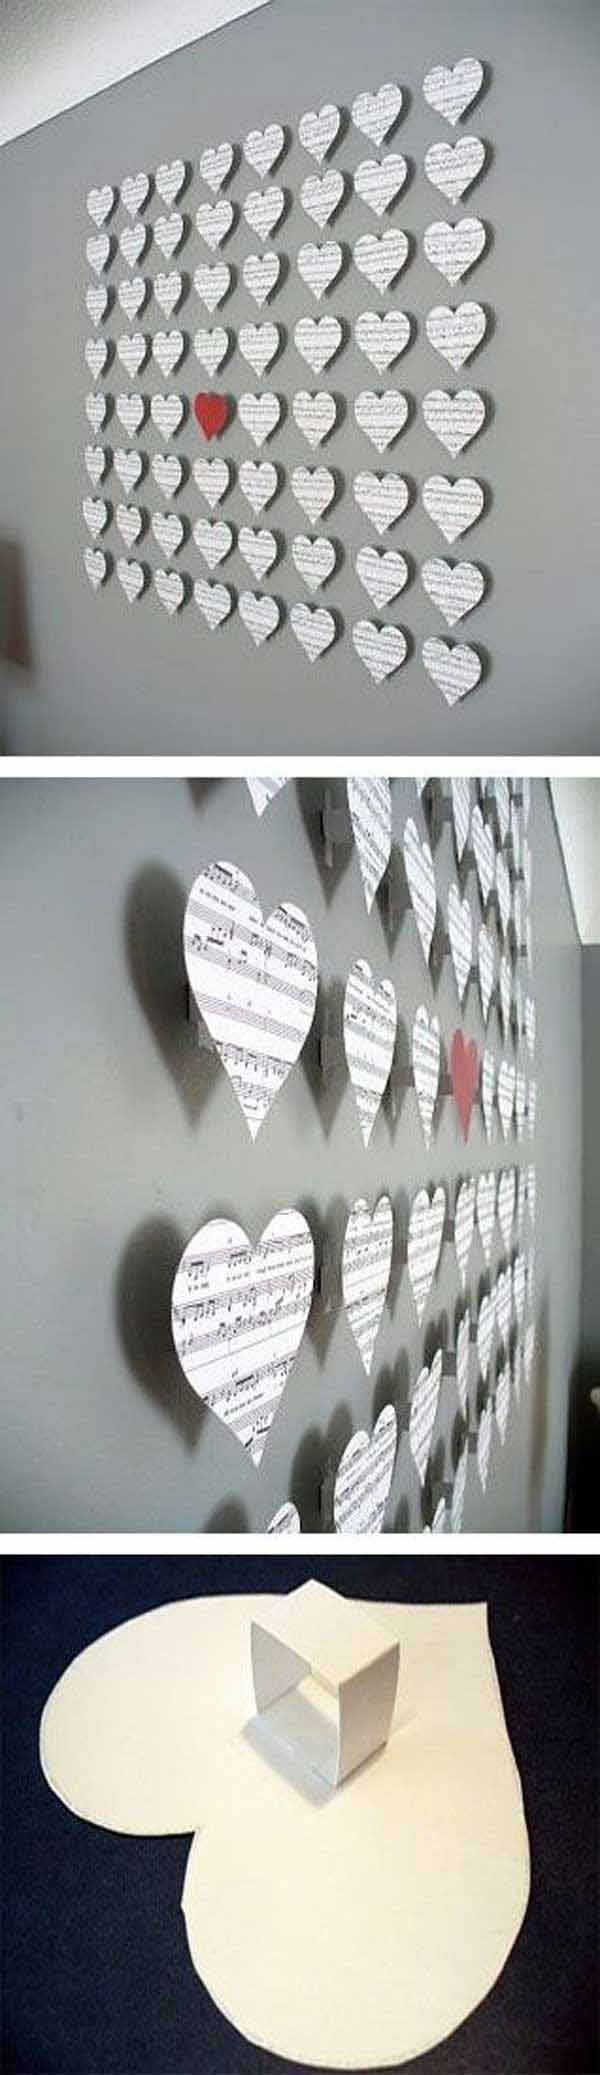 Wall Decorating Ideas DIY
 26 DIY Cool And No Money Decorating Ideas for Your Wall